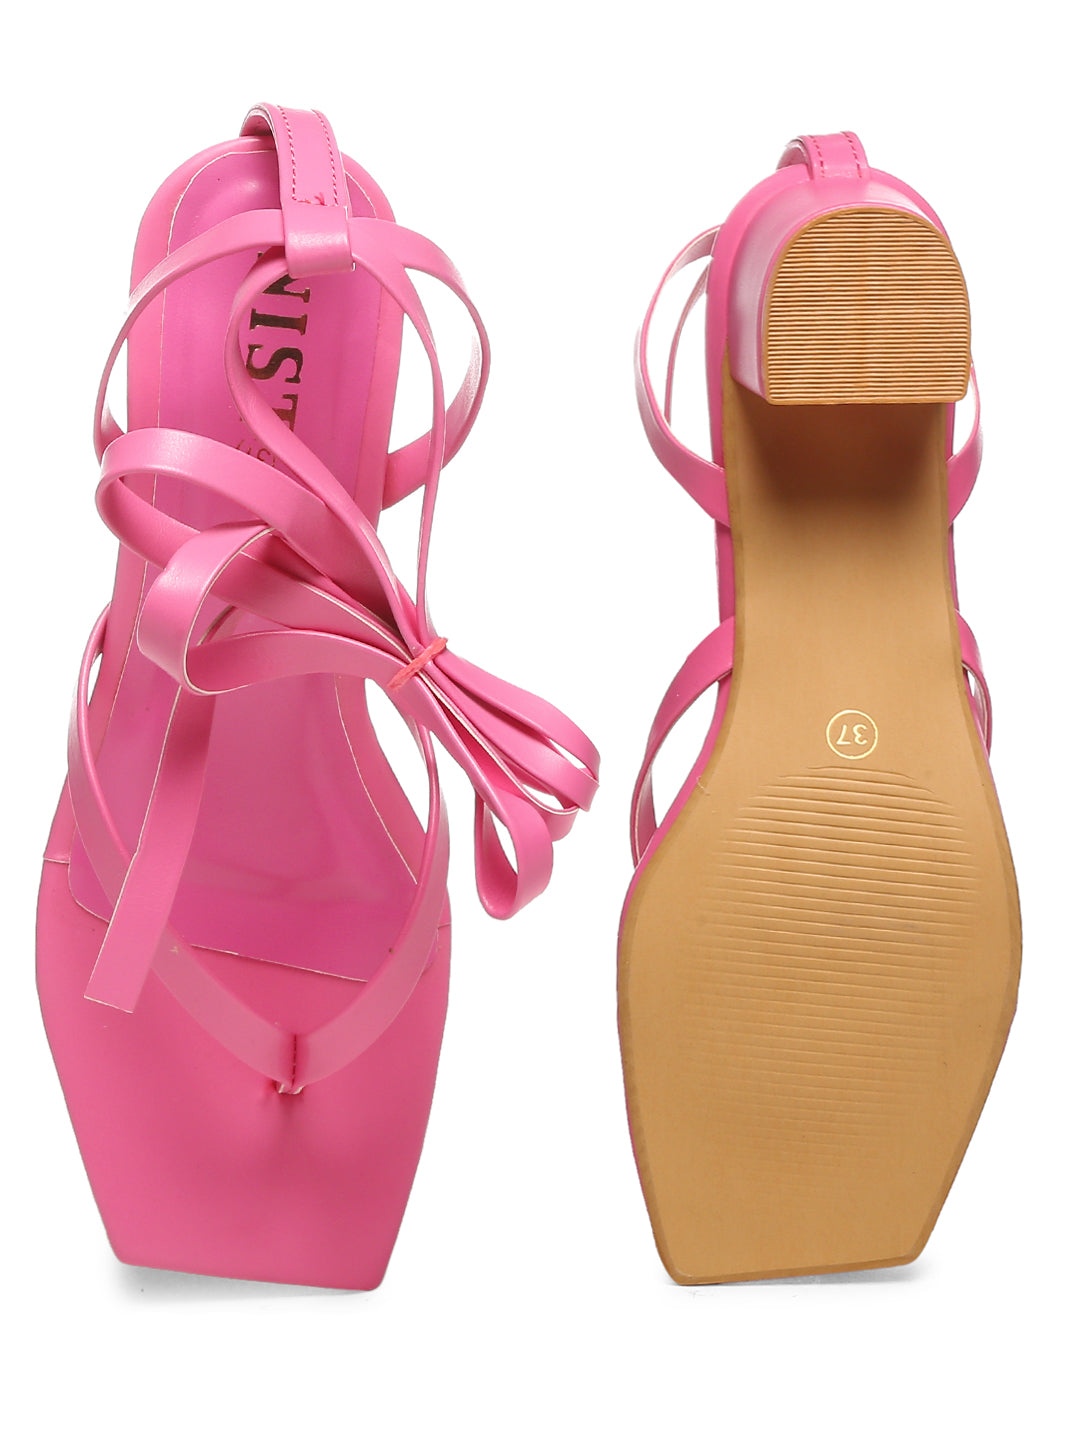 symoid Womens Flat Sandals Wide Width- Open Toe Comfort New Summer Casual Hot  Pink Sandals for Ladies Size 8.5 - Walmart.com